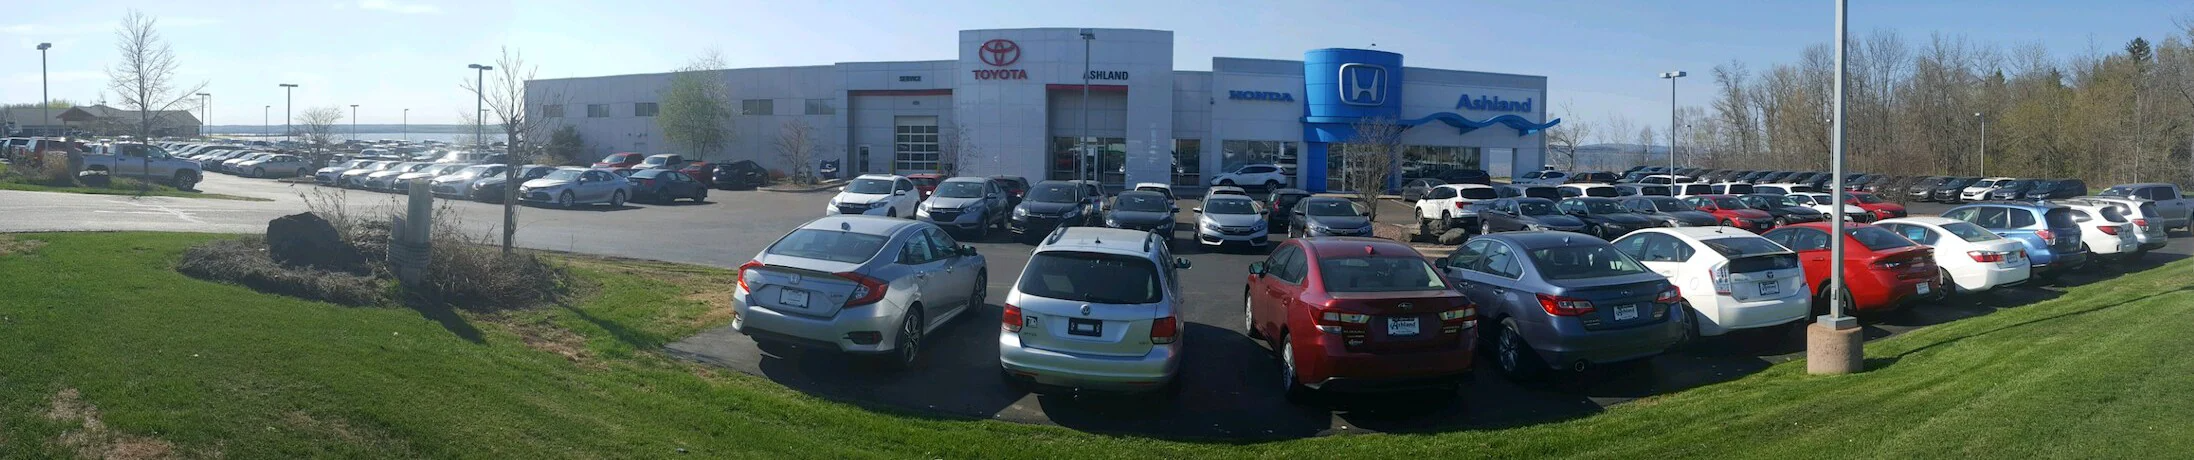 The front of the dealership